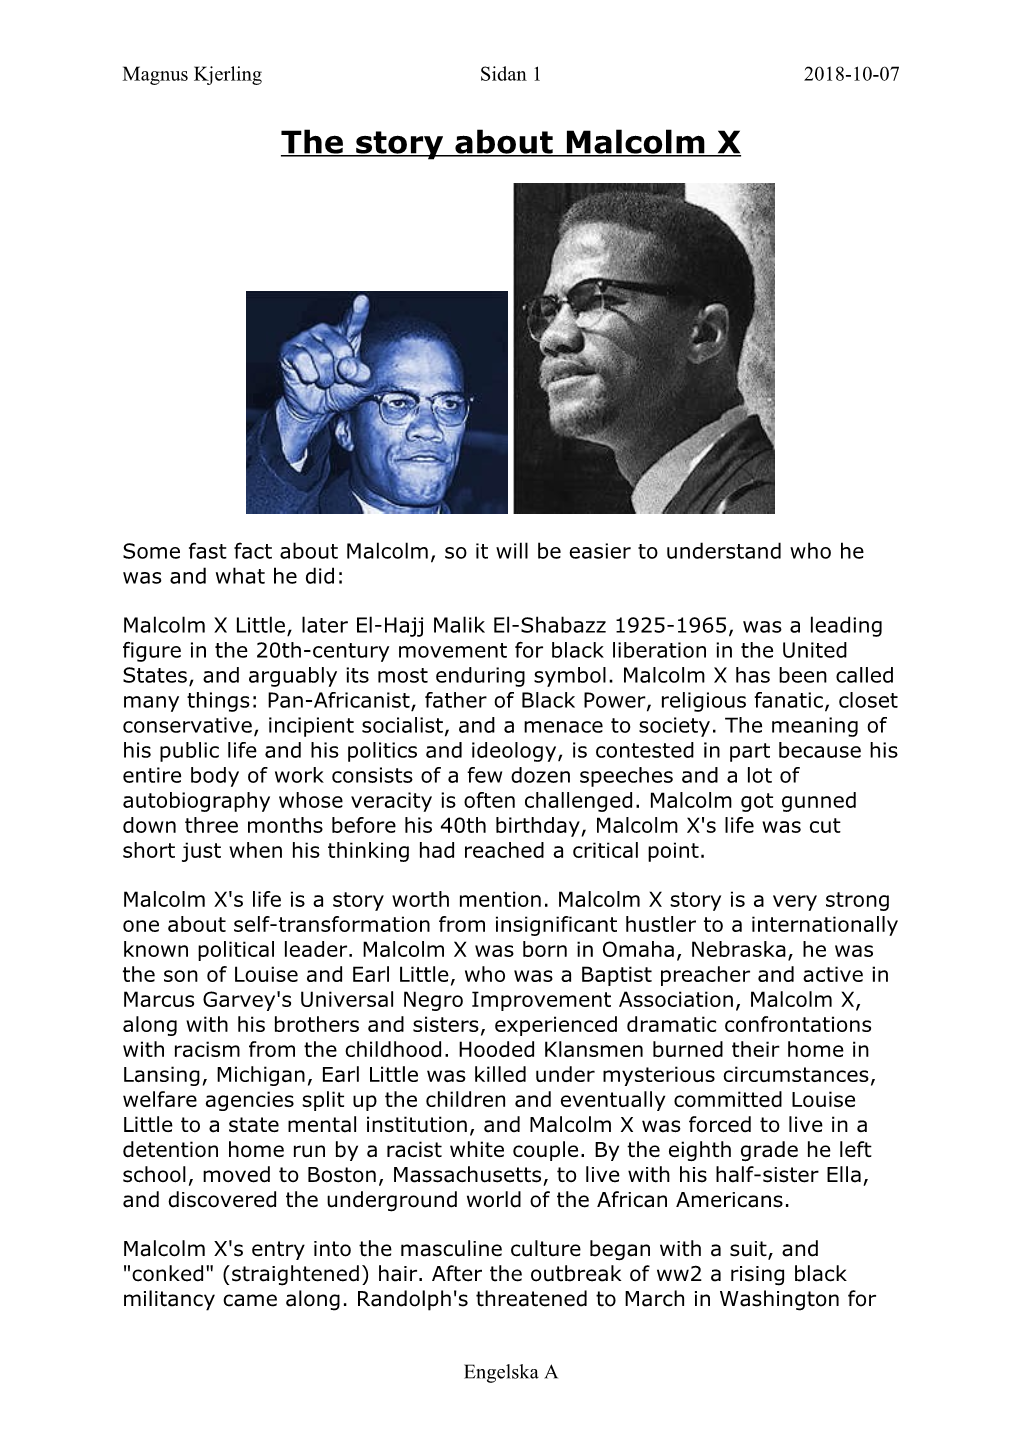 The Story About Malcolm X